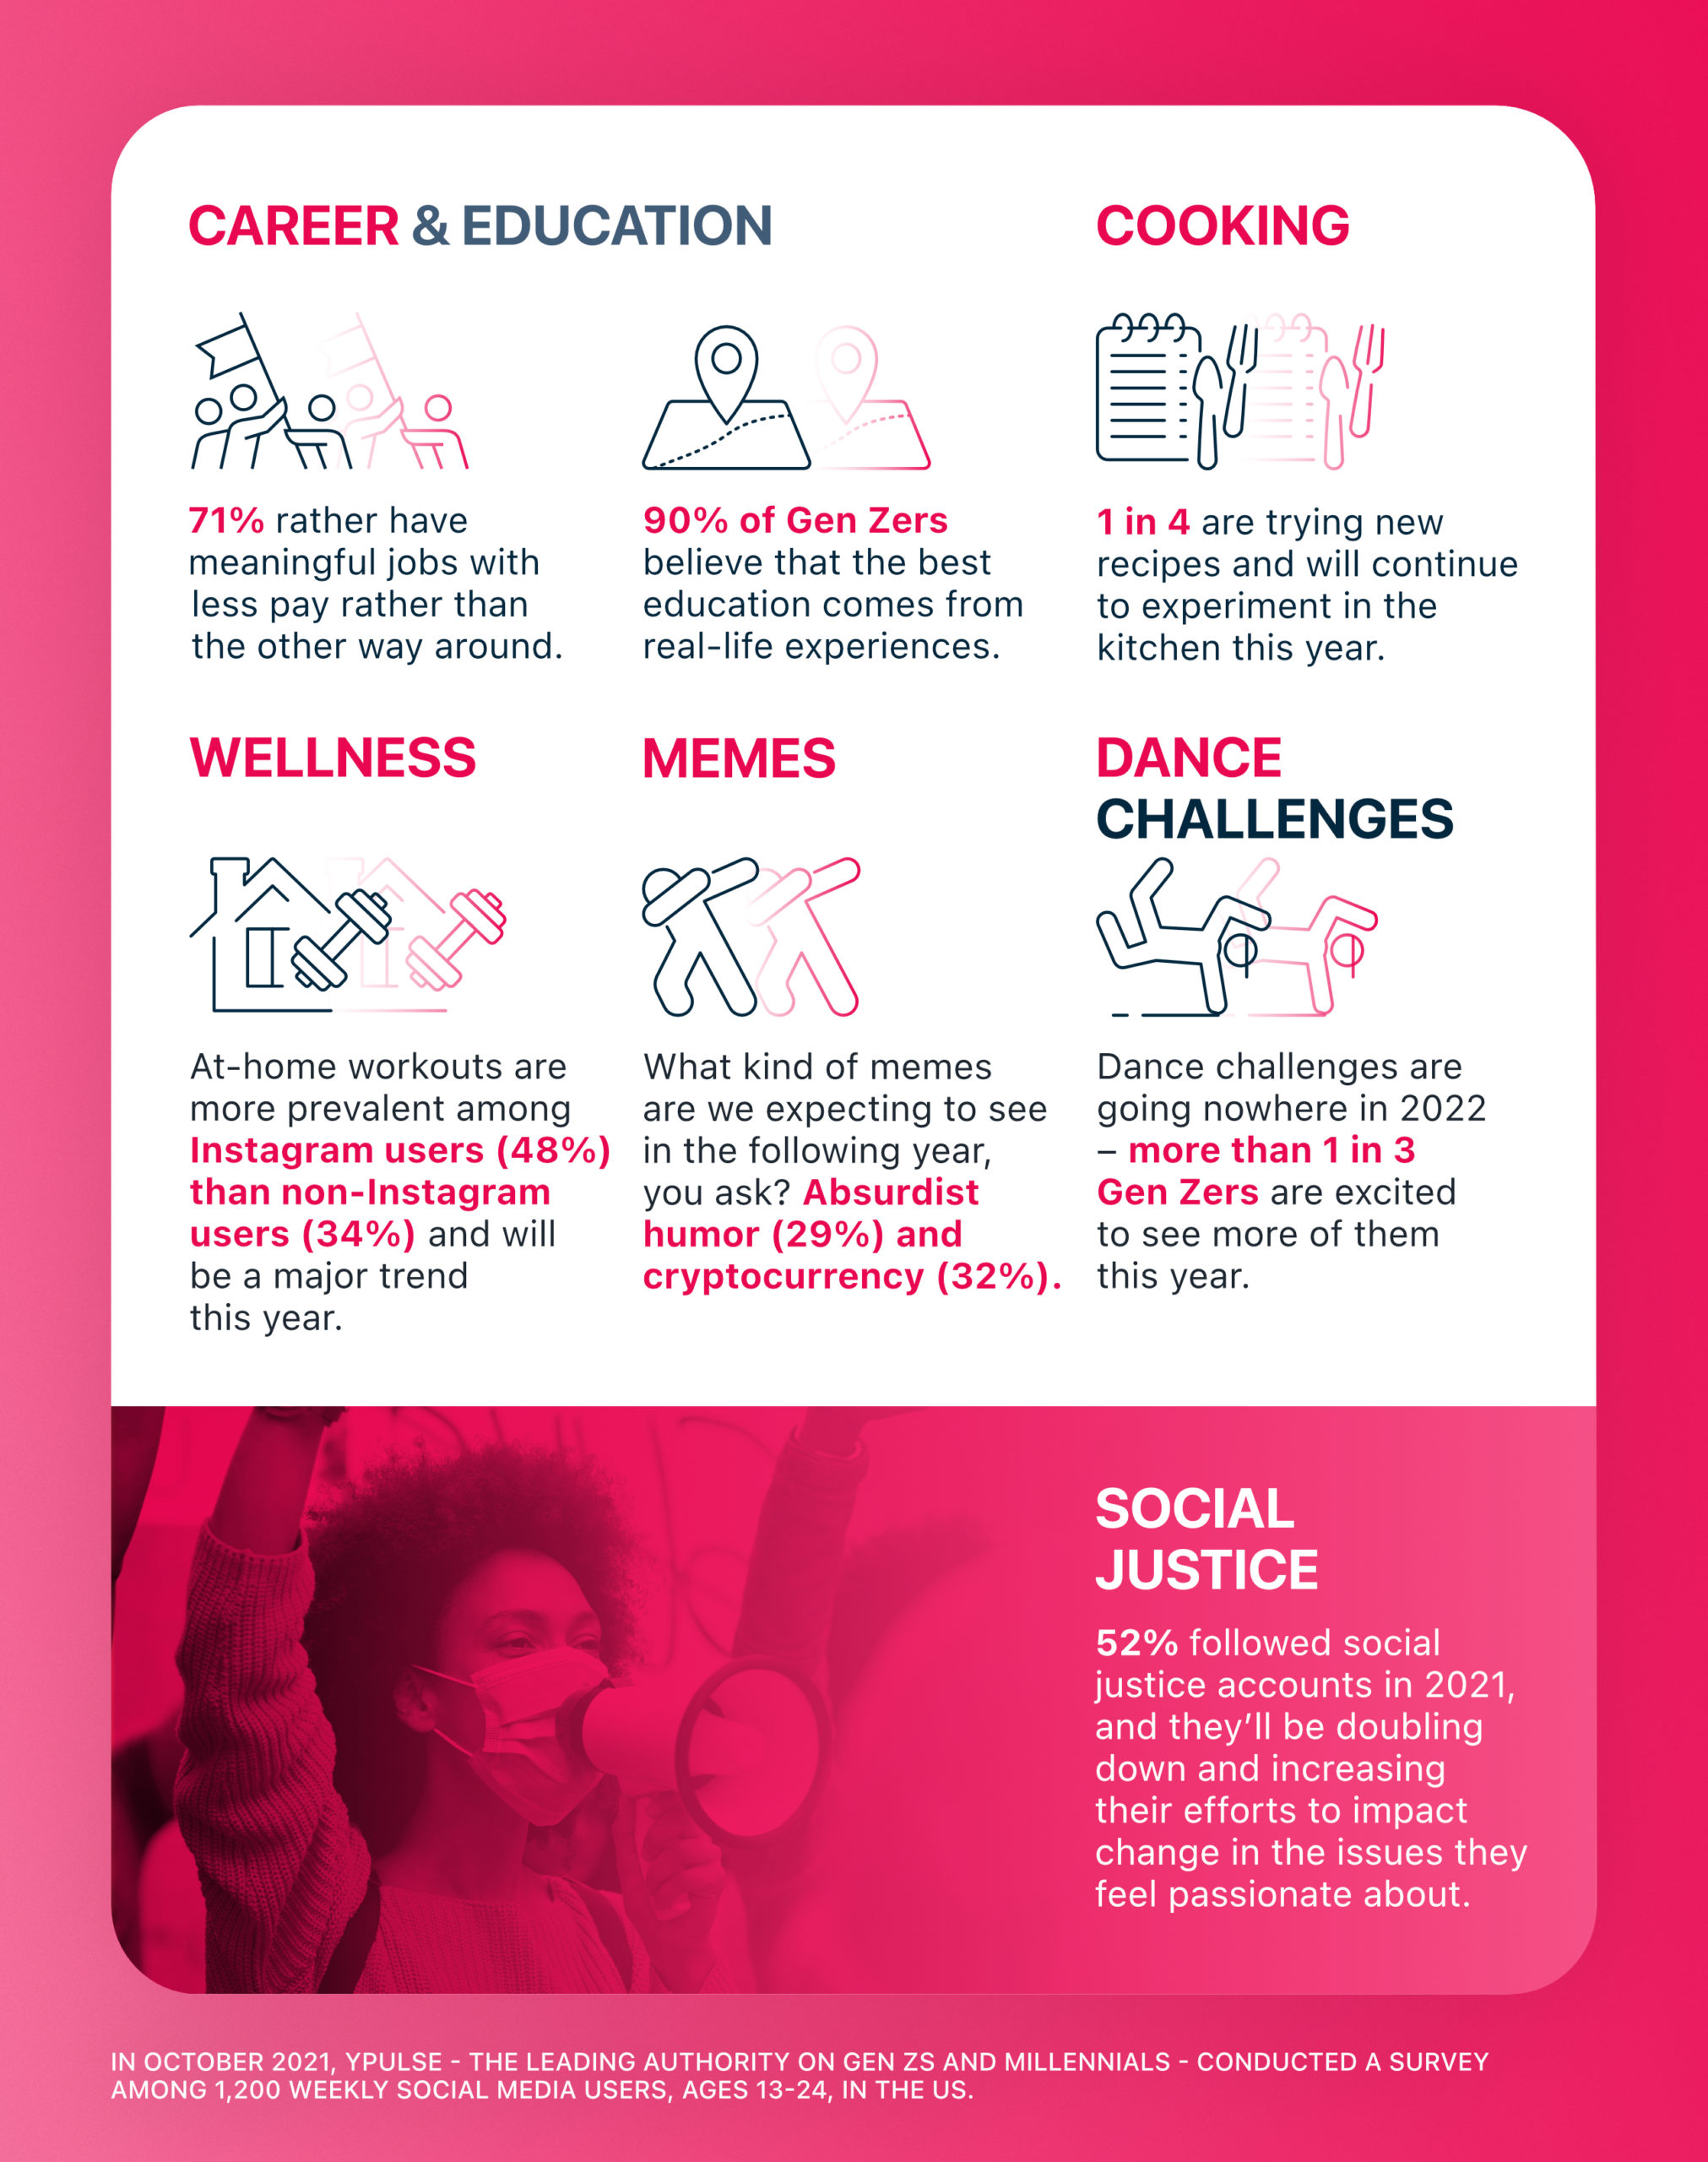 Career & education, cooking, memes and dance challenges are crucial instagram trends for Gen Z in 2022